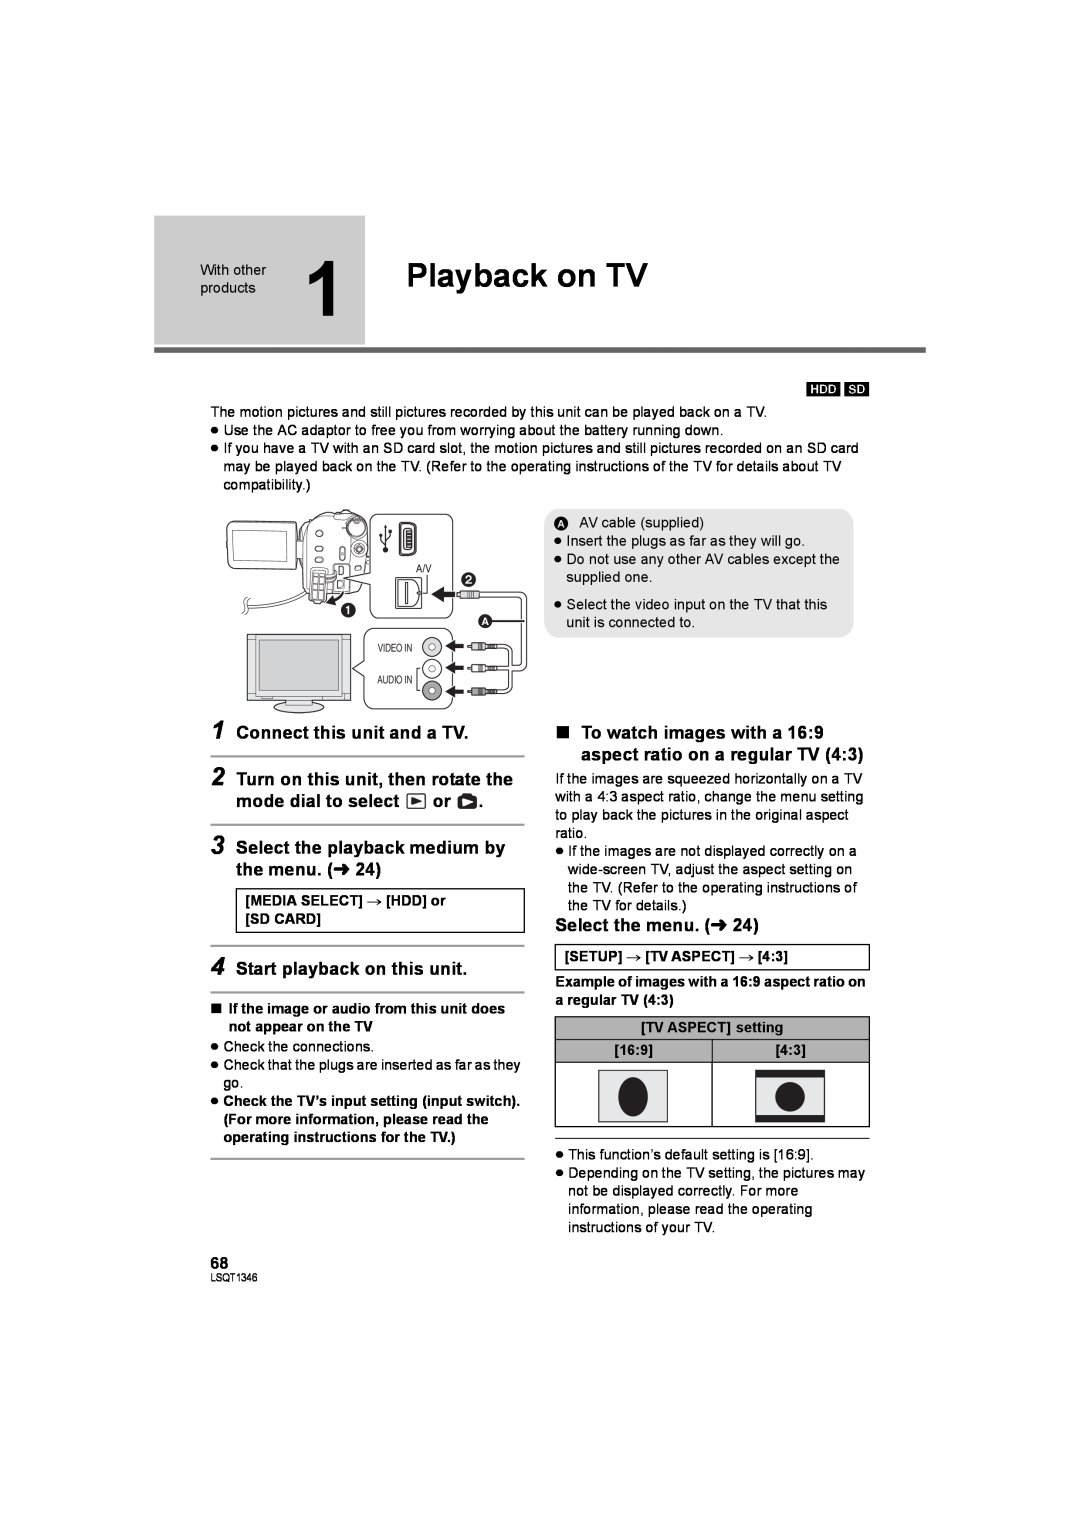 Panasonic SDR-H50 Playback on TV, Connect this unit and a TV, Turn on this unit, then rotate the mode dial to select or 